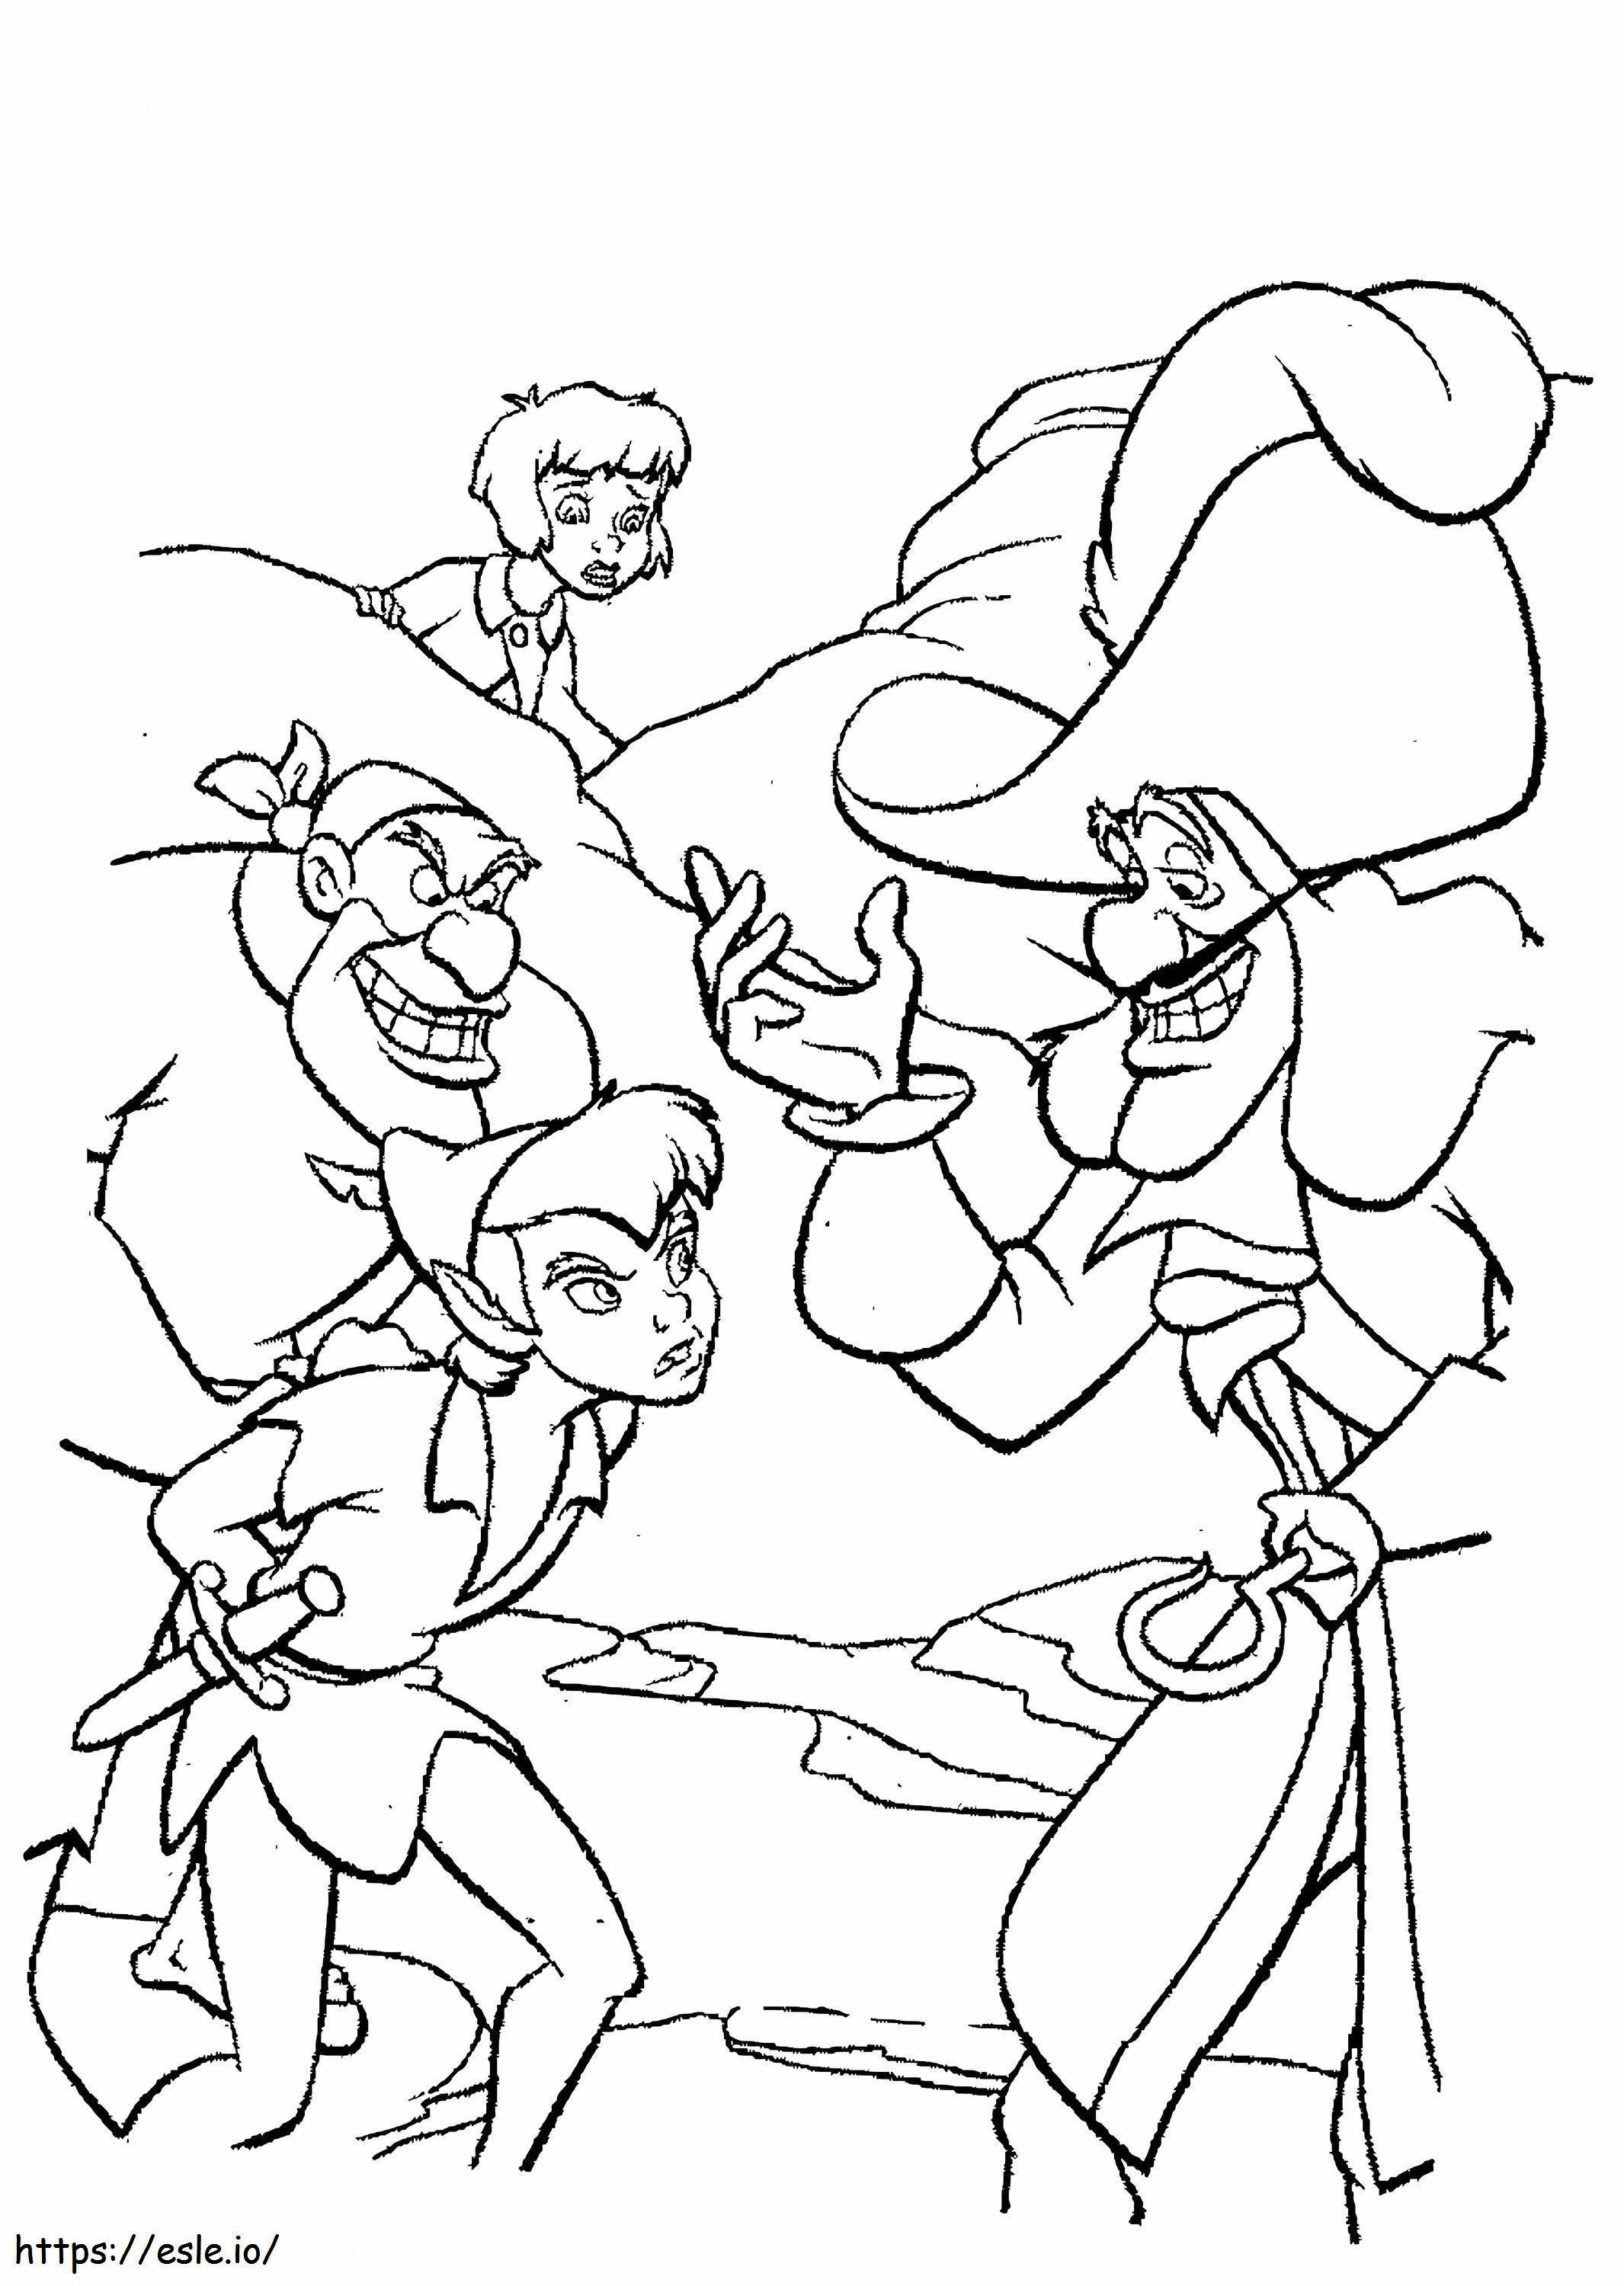 Peter Pan Was Captured By Captain Hook coloring page